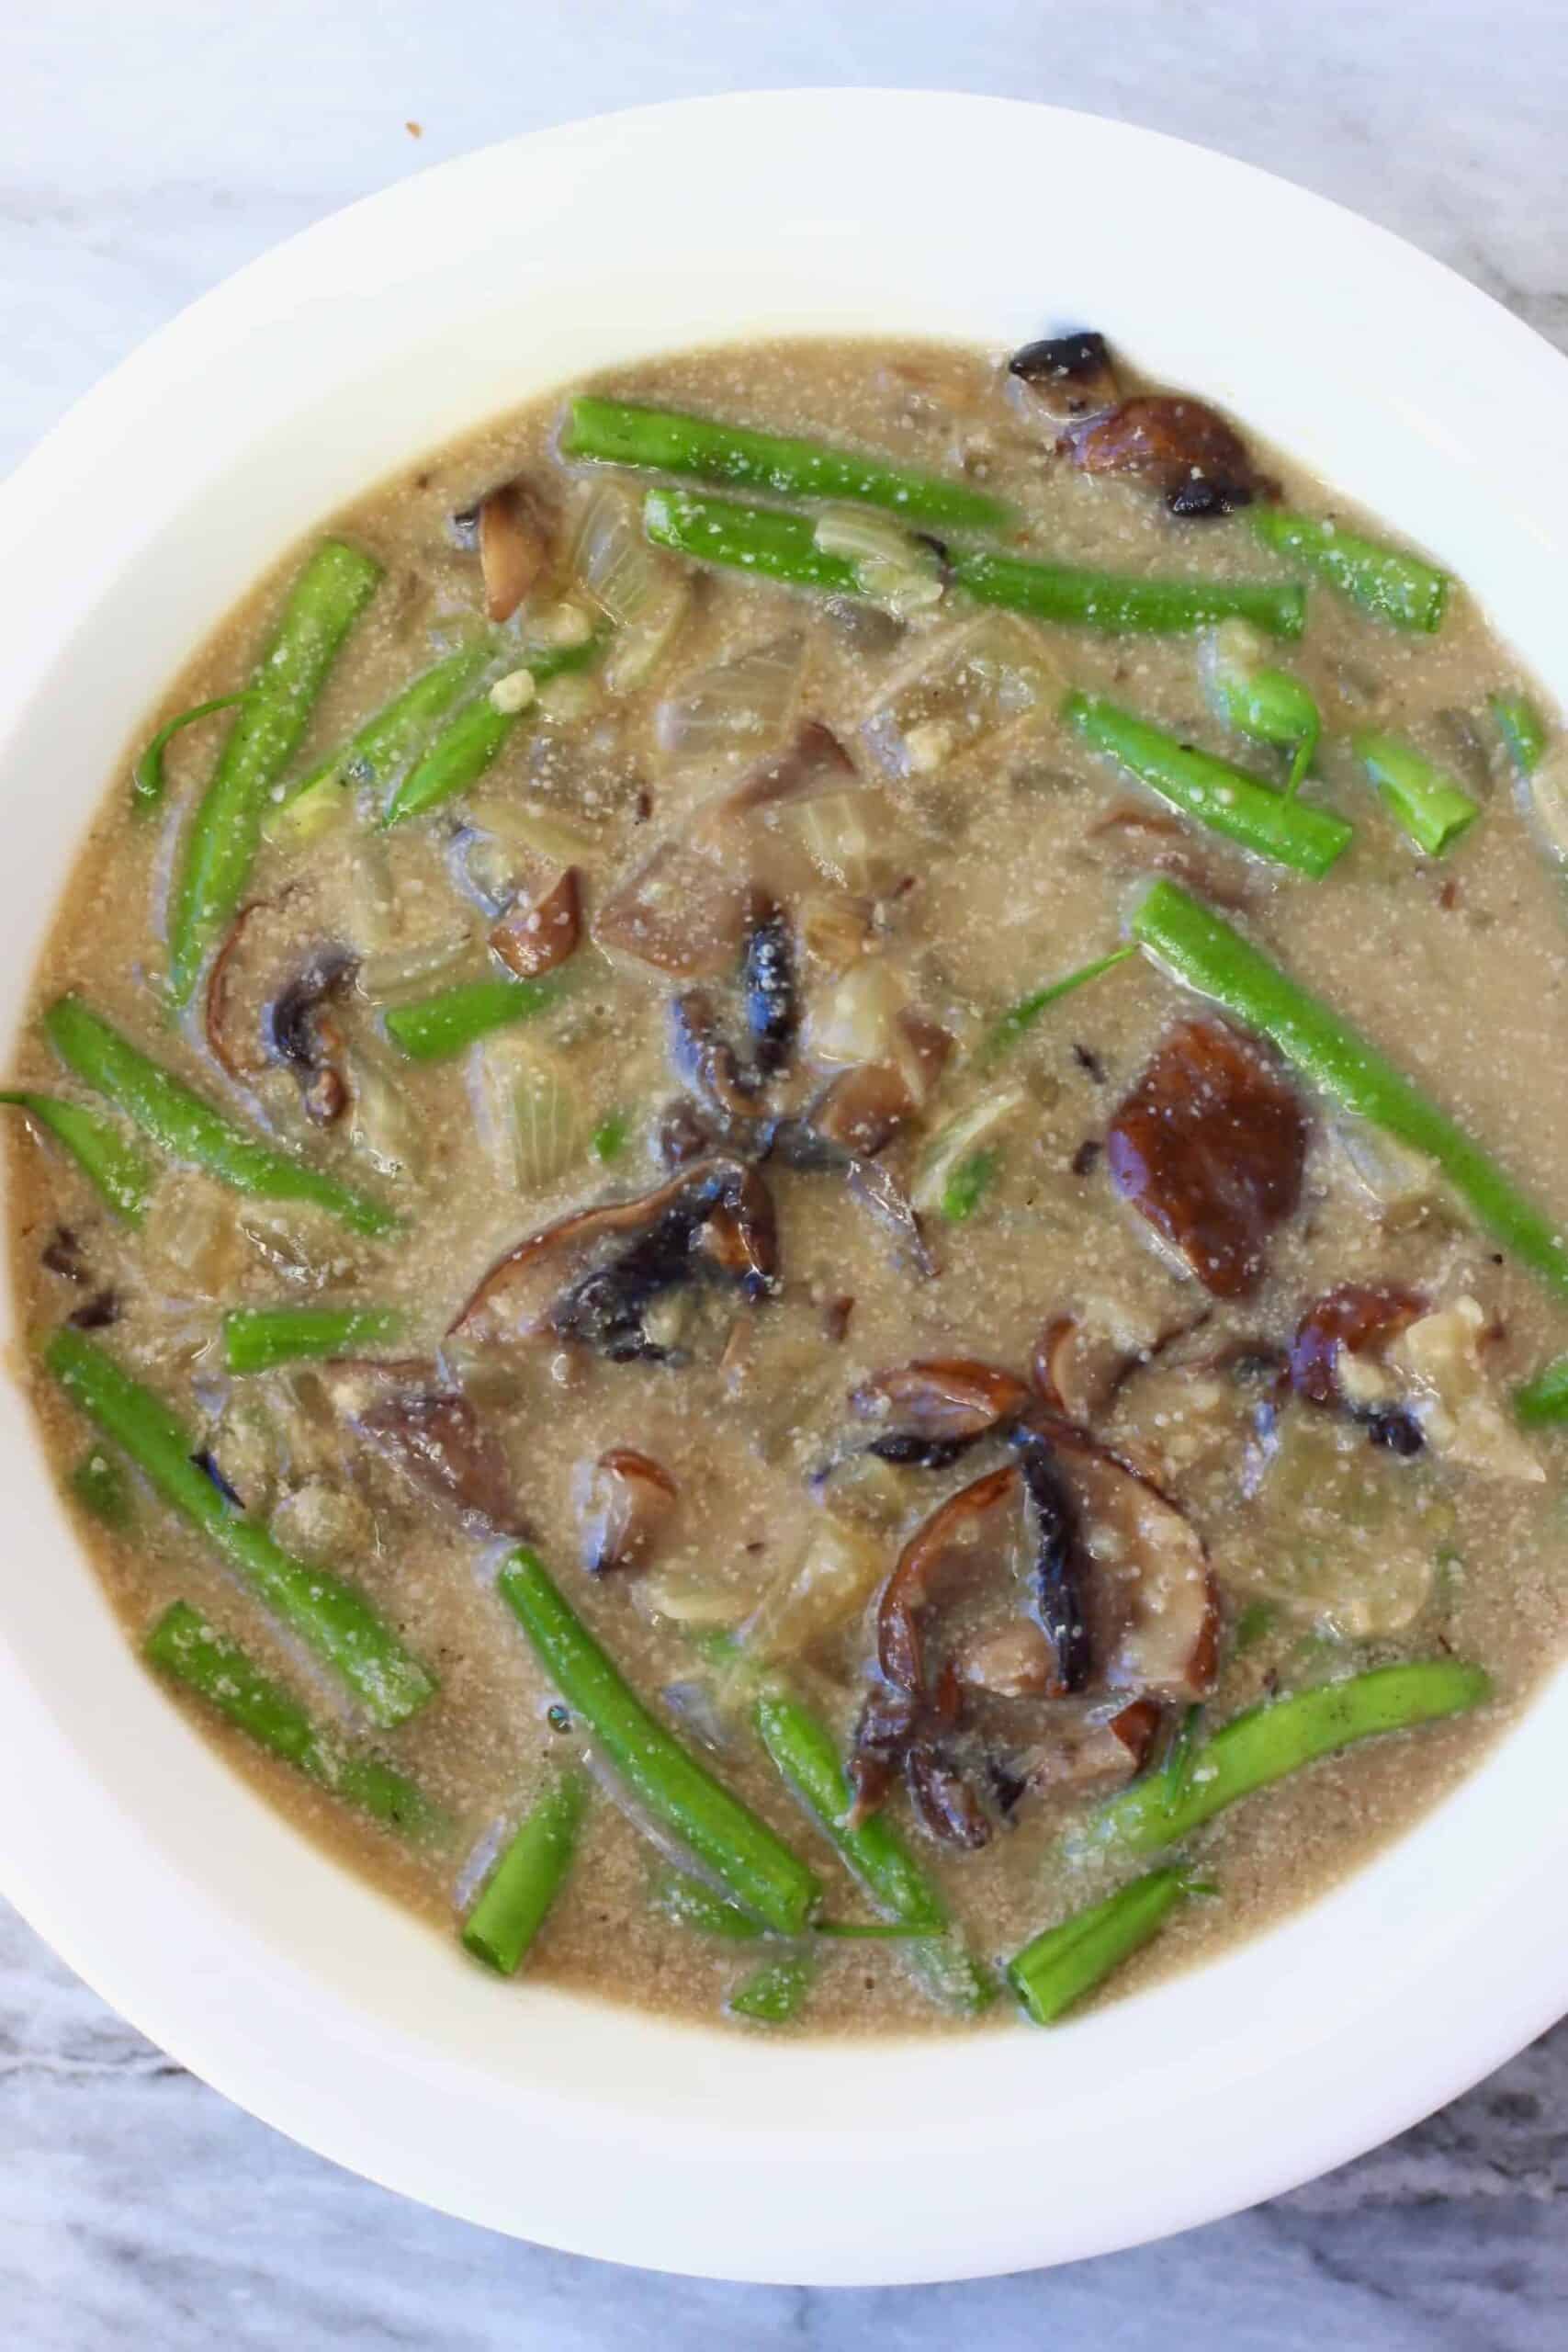 Brown creamy mushroom sauce and green beans in a pie dish